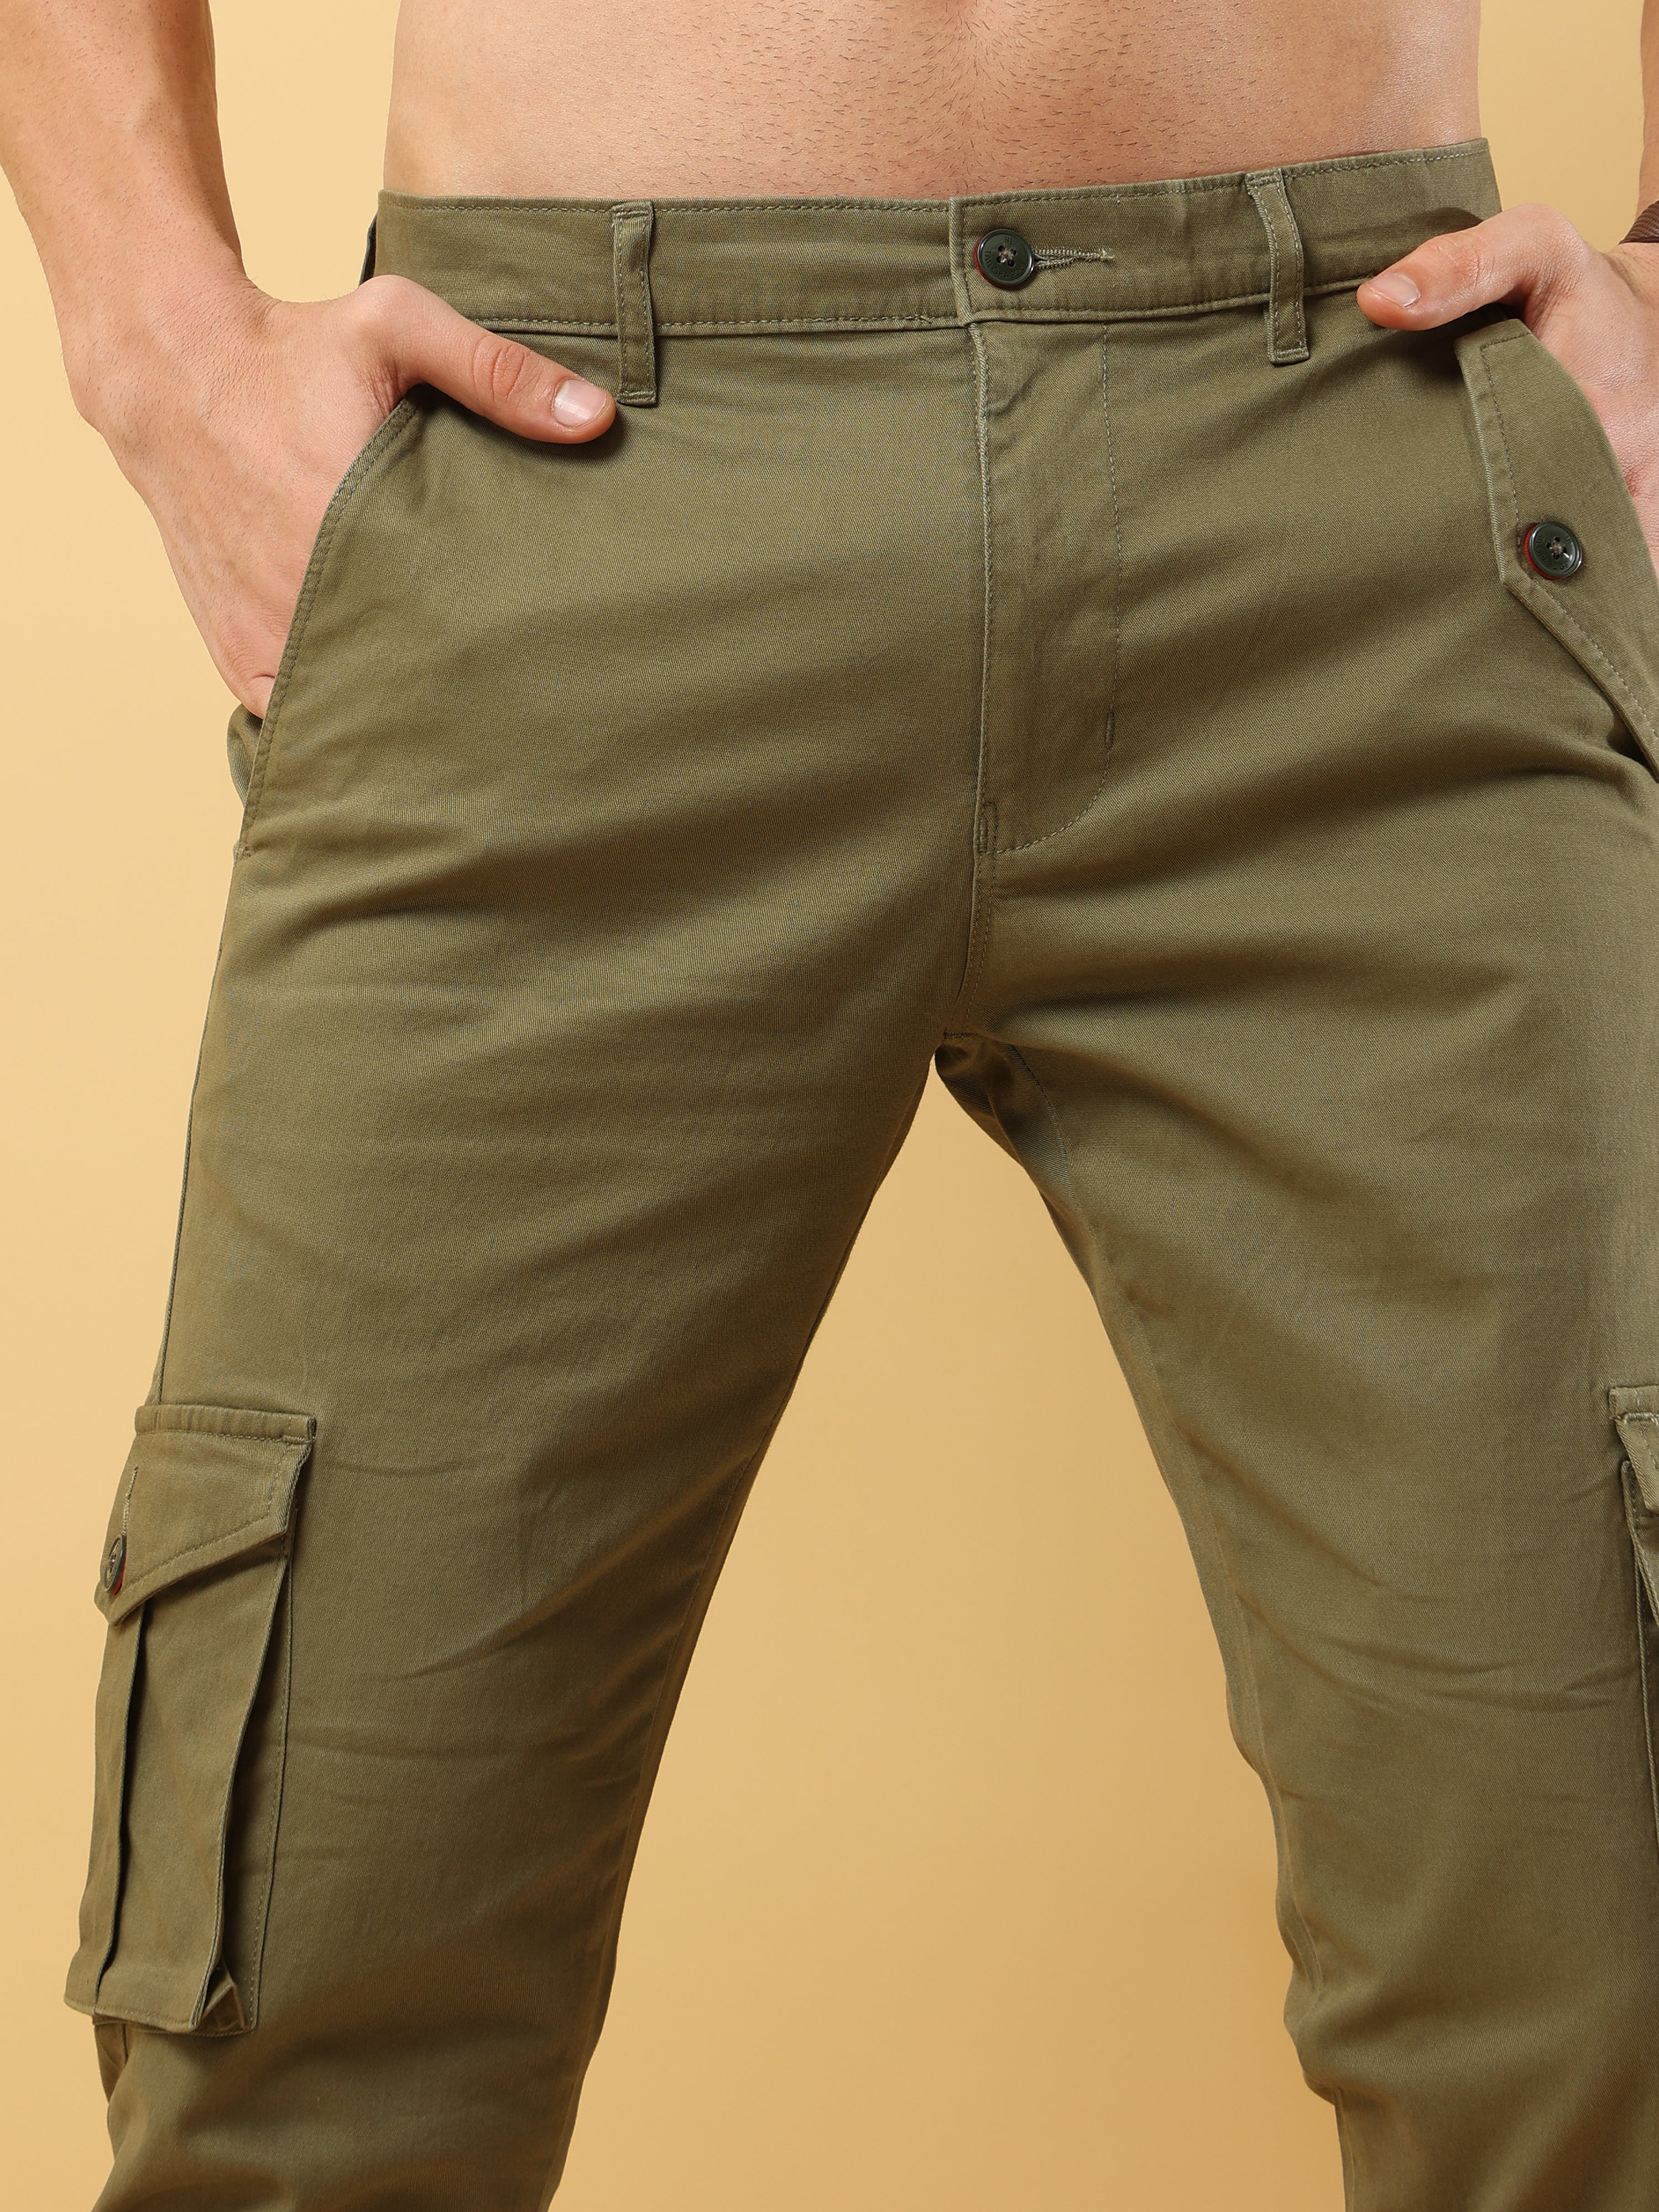 Slim Fit Olive Green Cargo Pant